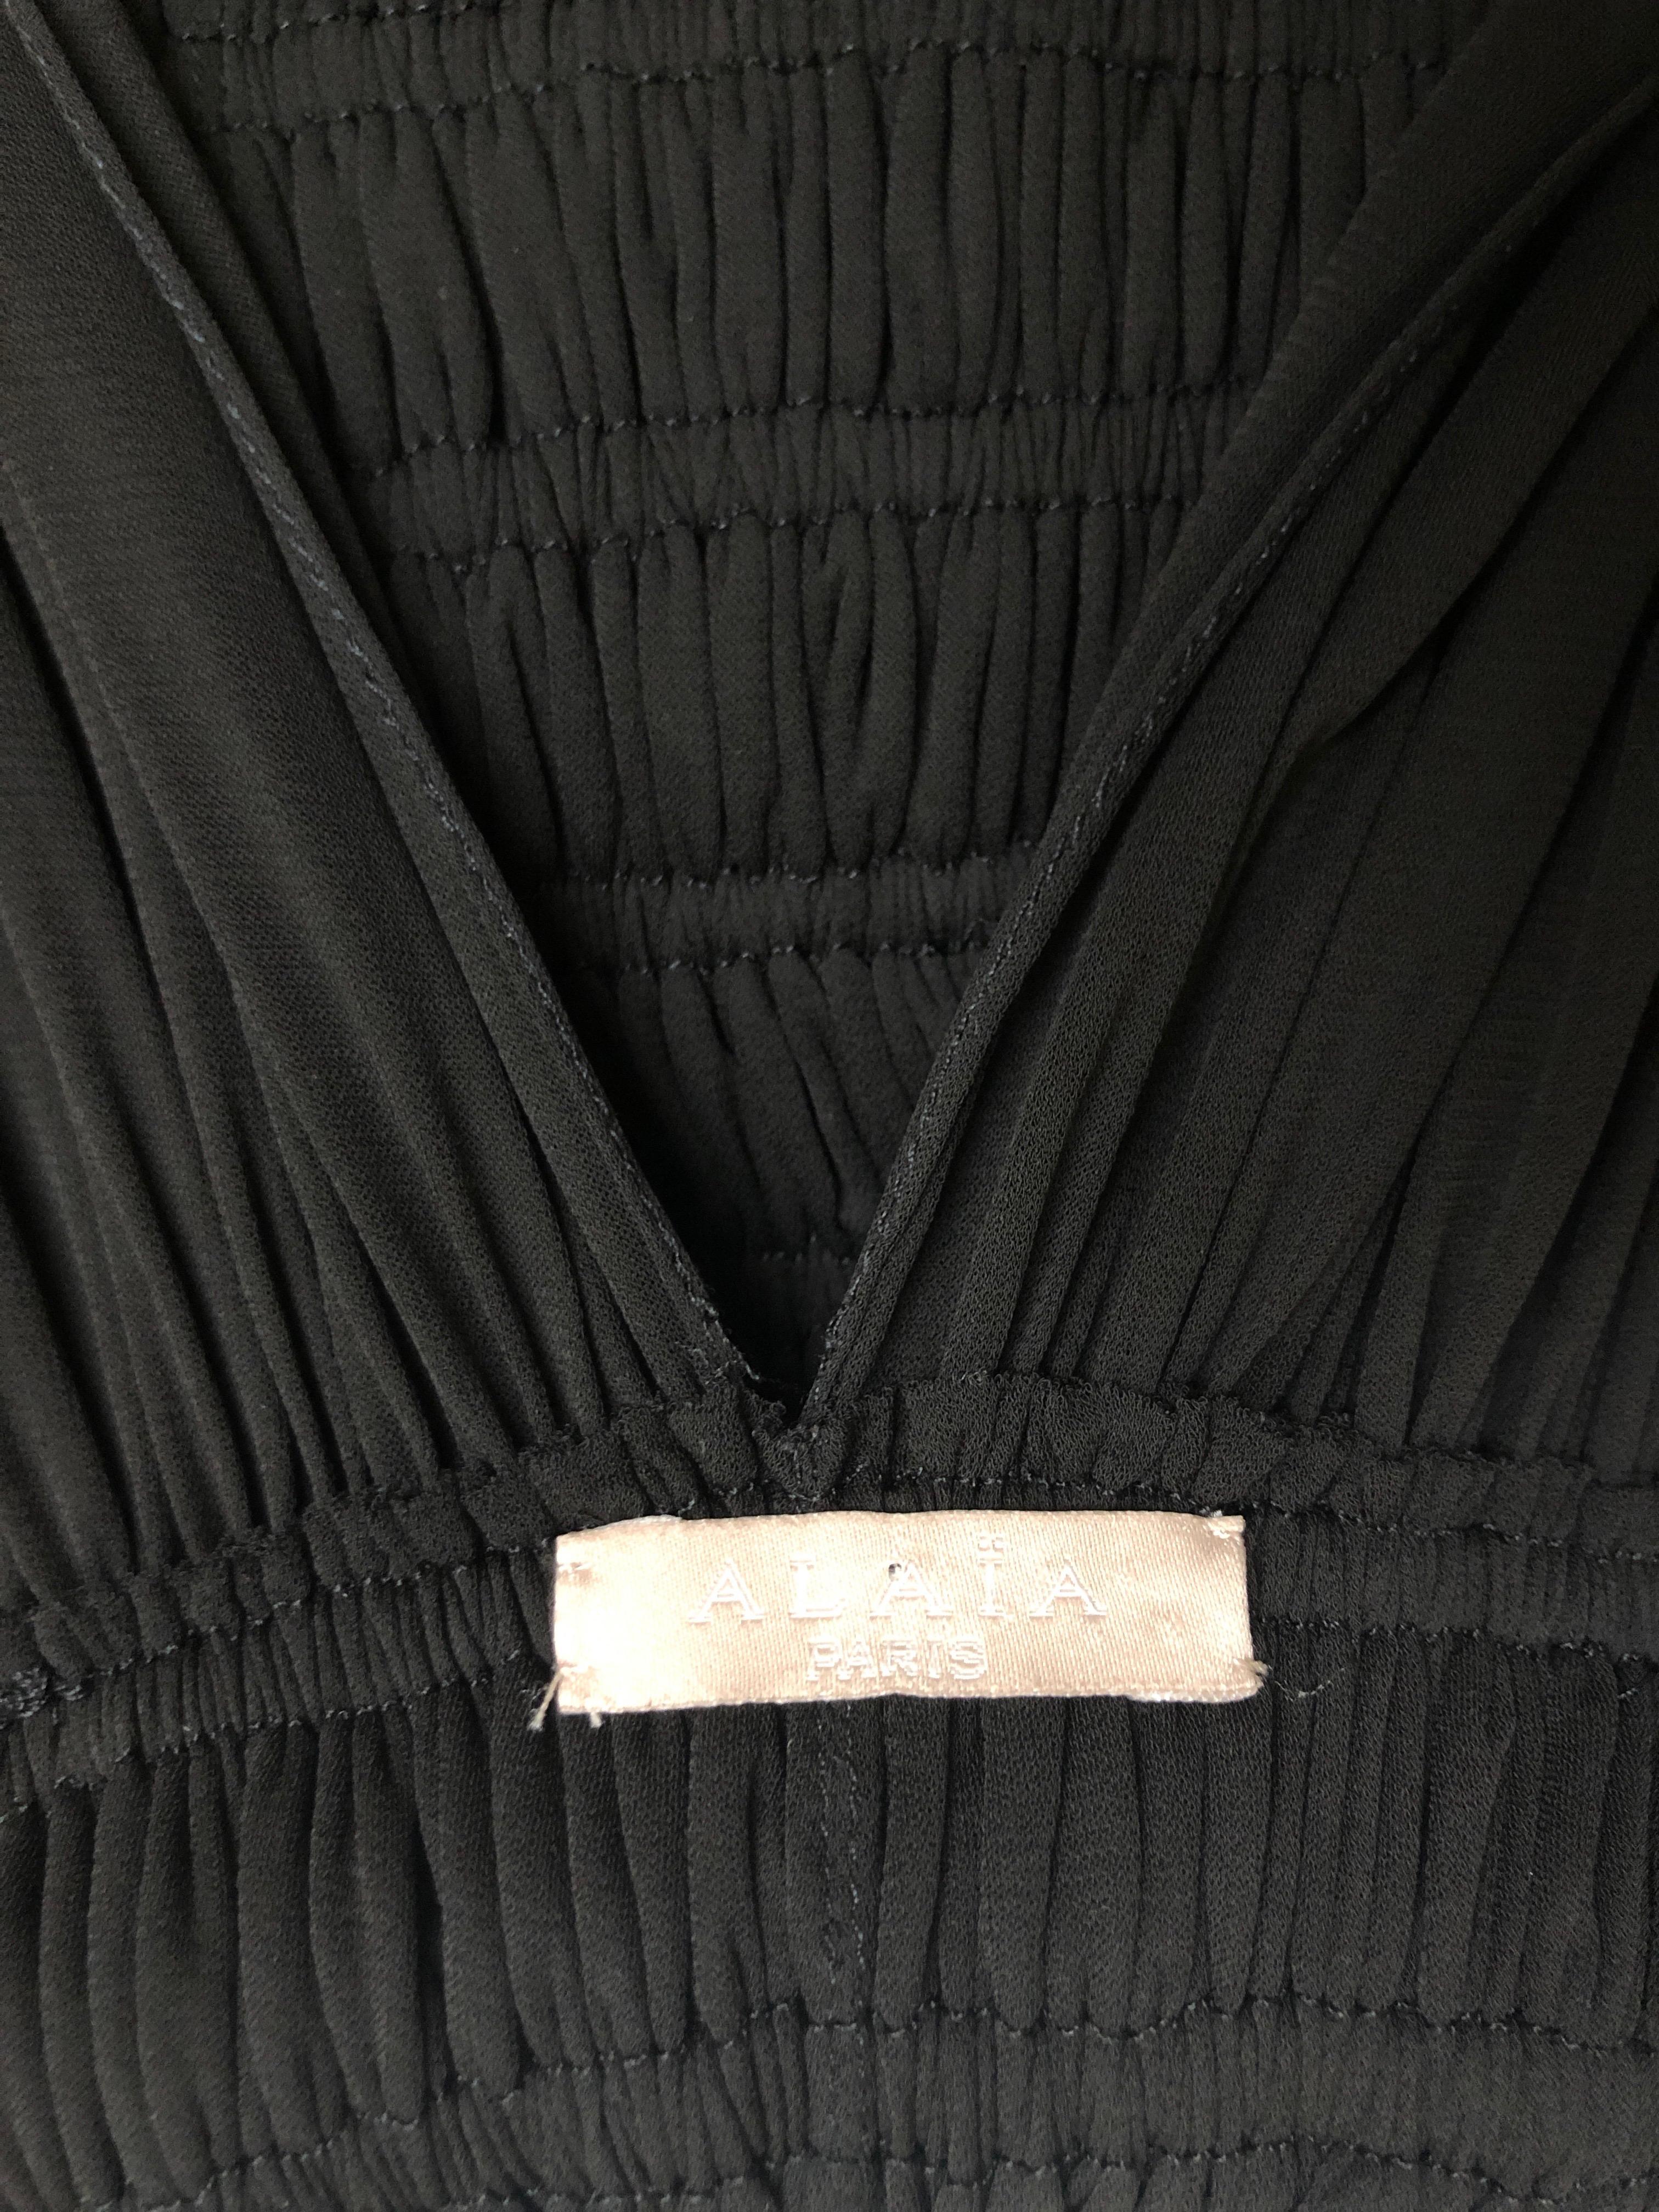 Azzedine Alaia Vintage Black Pleated Goddess Gown from Autumn 1991  For Sale 5